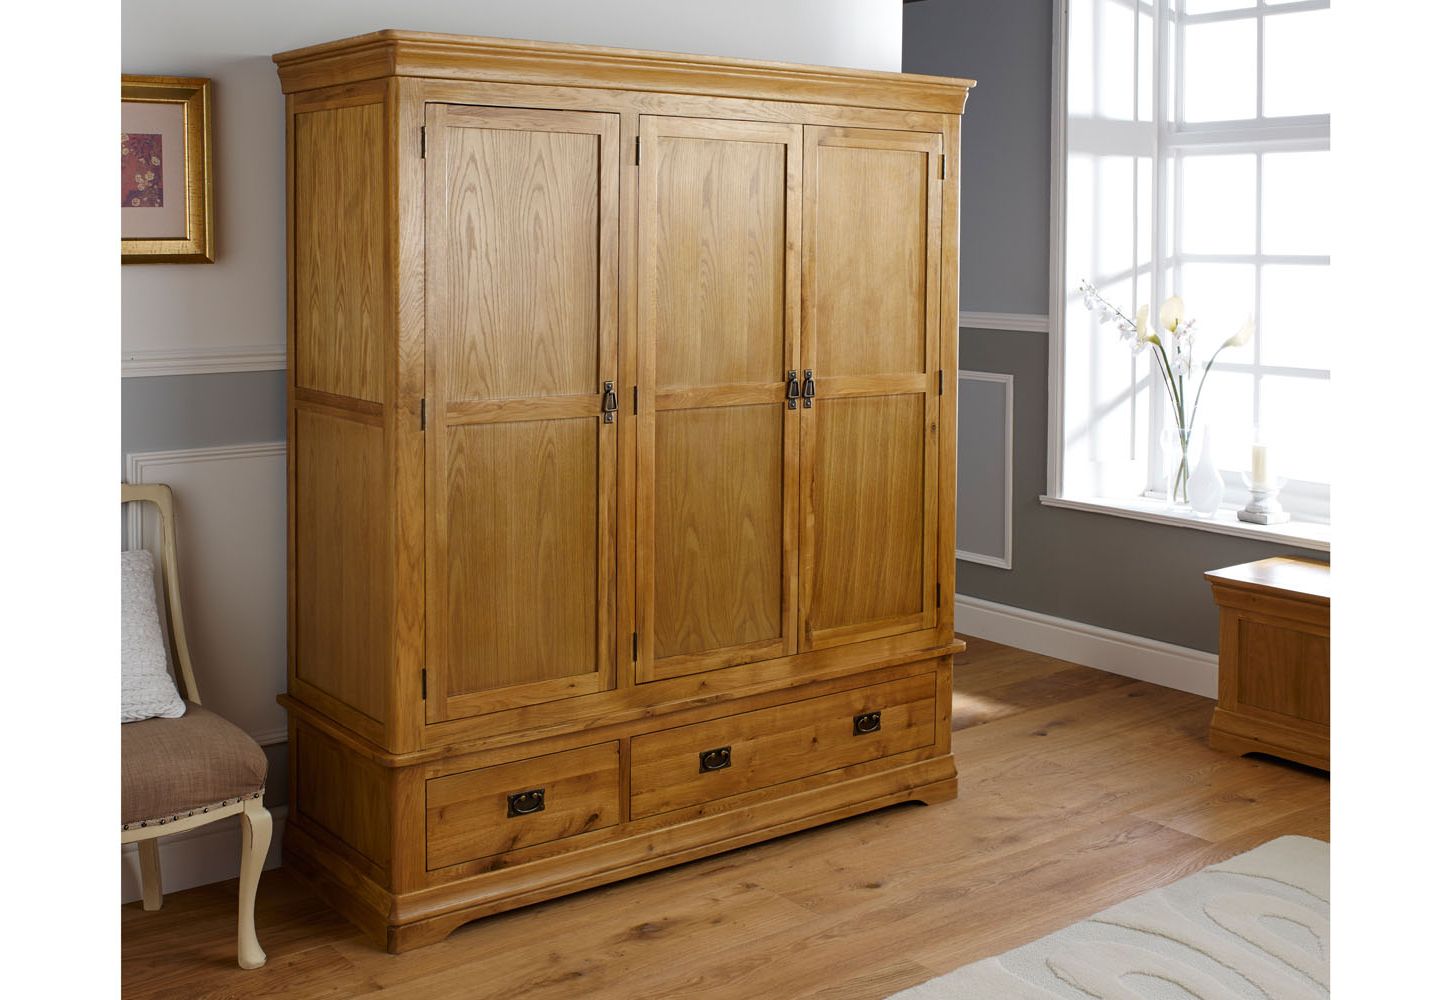 French Farmhouse Large Triple Oak Wardrobe – Free Delivery | Top Furniture With Oak Wardrobes With Drawers And Shelves (Gallery 5 of 20)